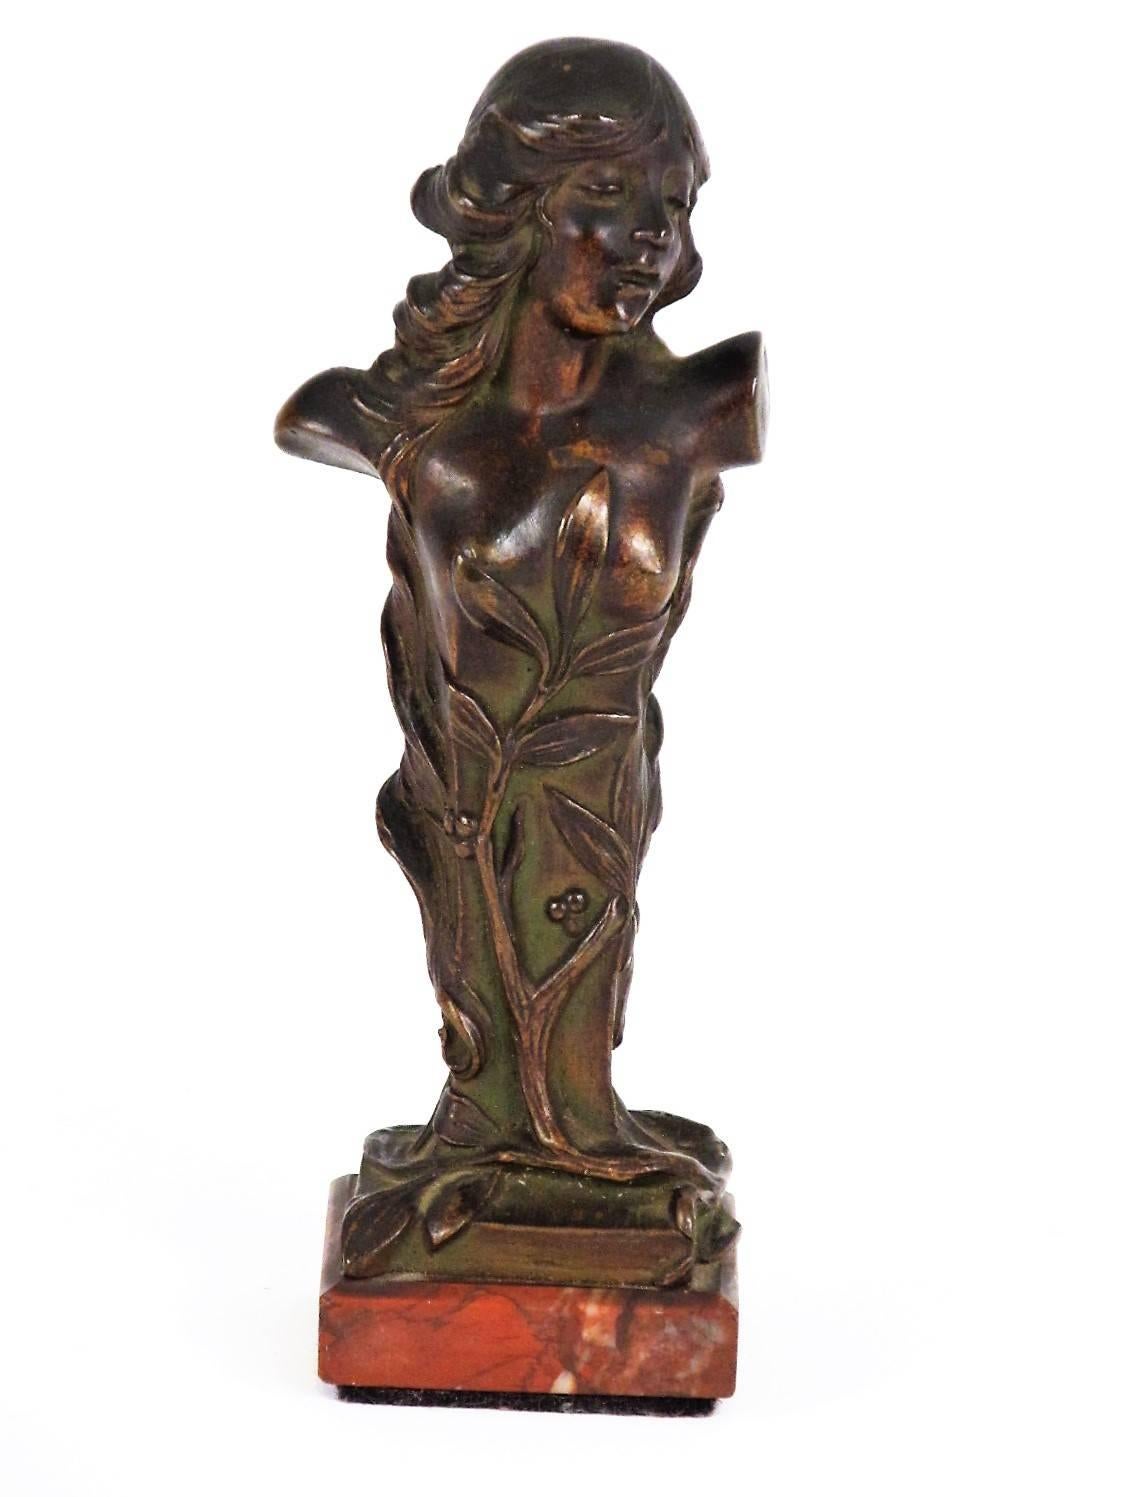 I was unable to identify the artist of this beautiful diminutive Art Nouveau bronze. Great patina and overall very nice condition. Her hair is great! Just as pretty from the back as the front. There may be a signature on the front of the bronze